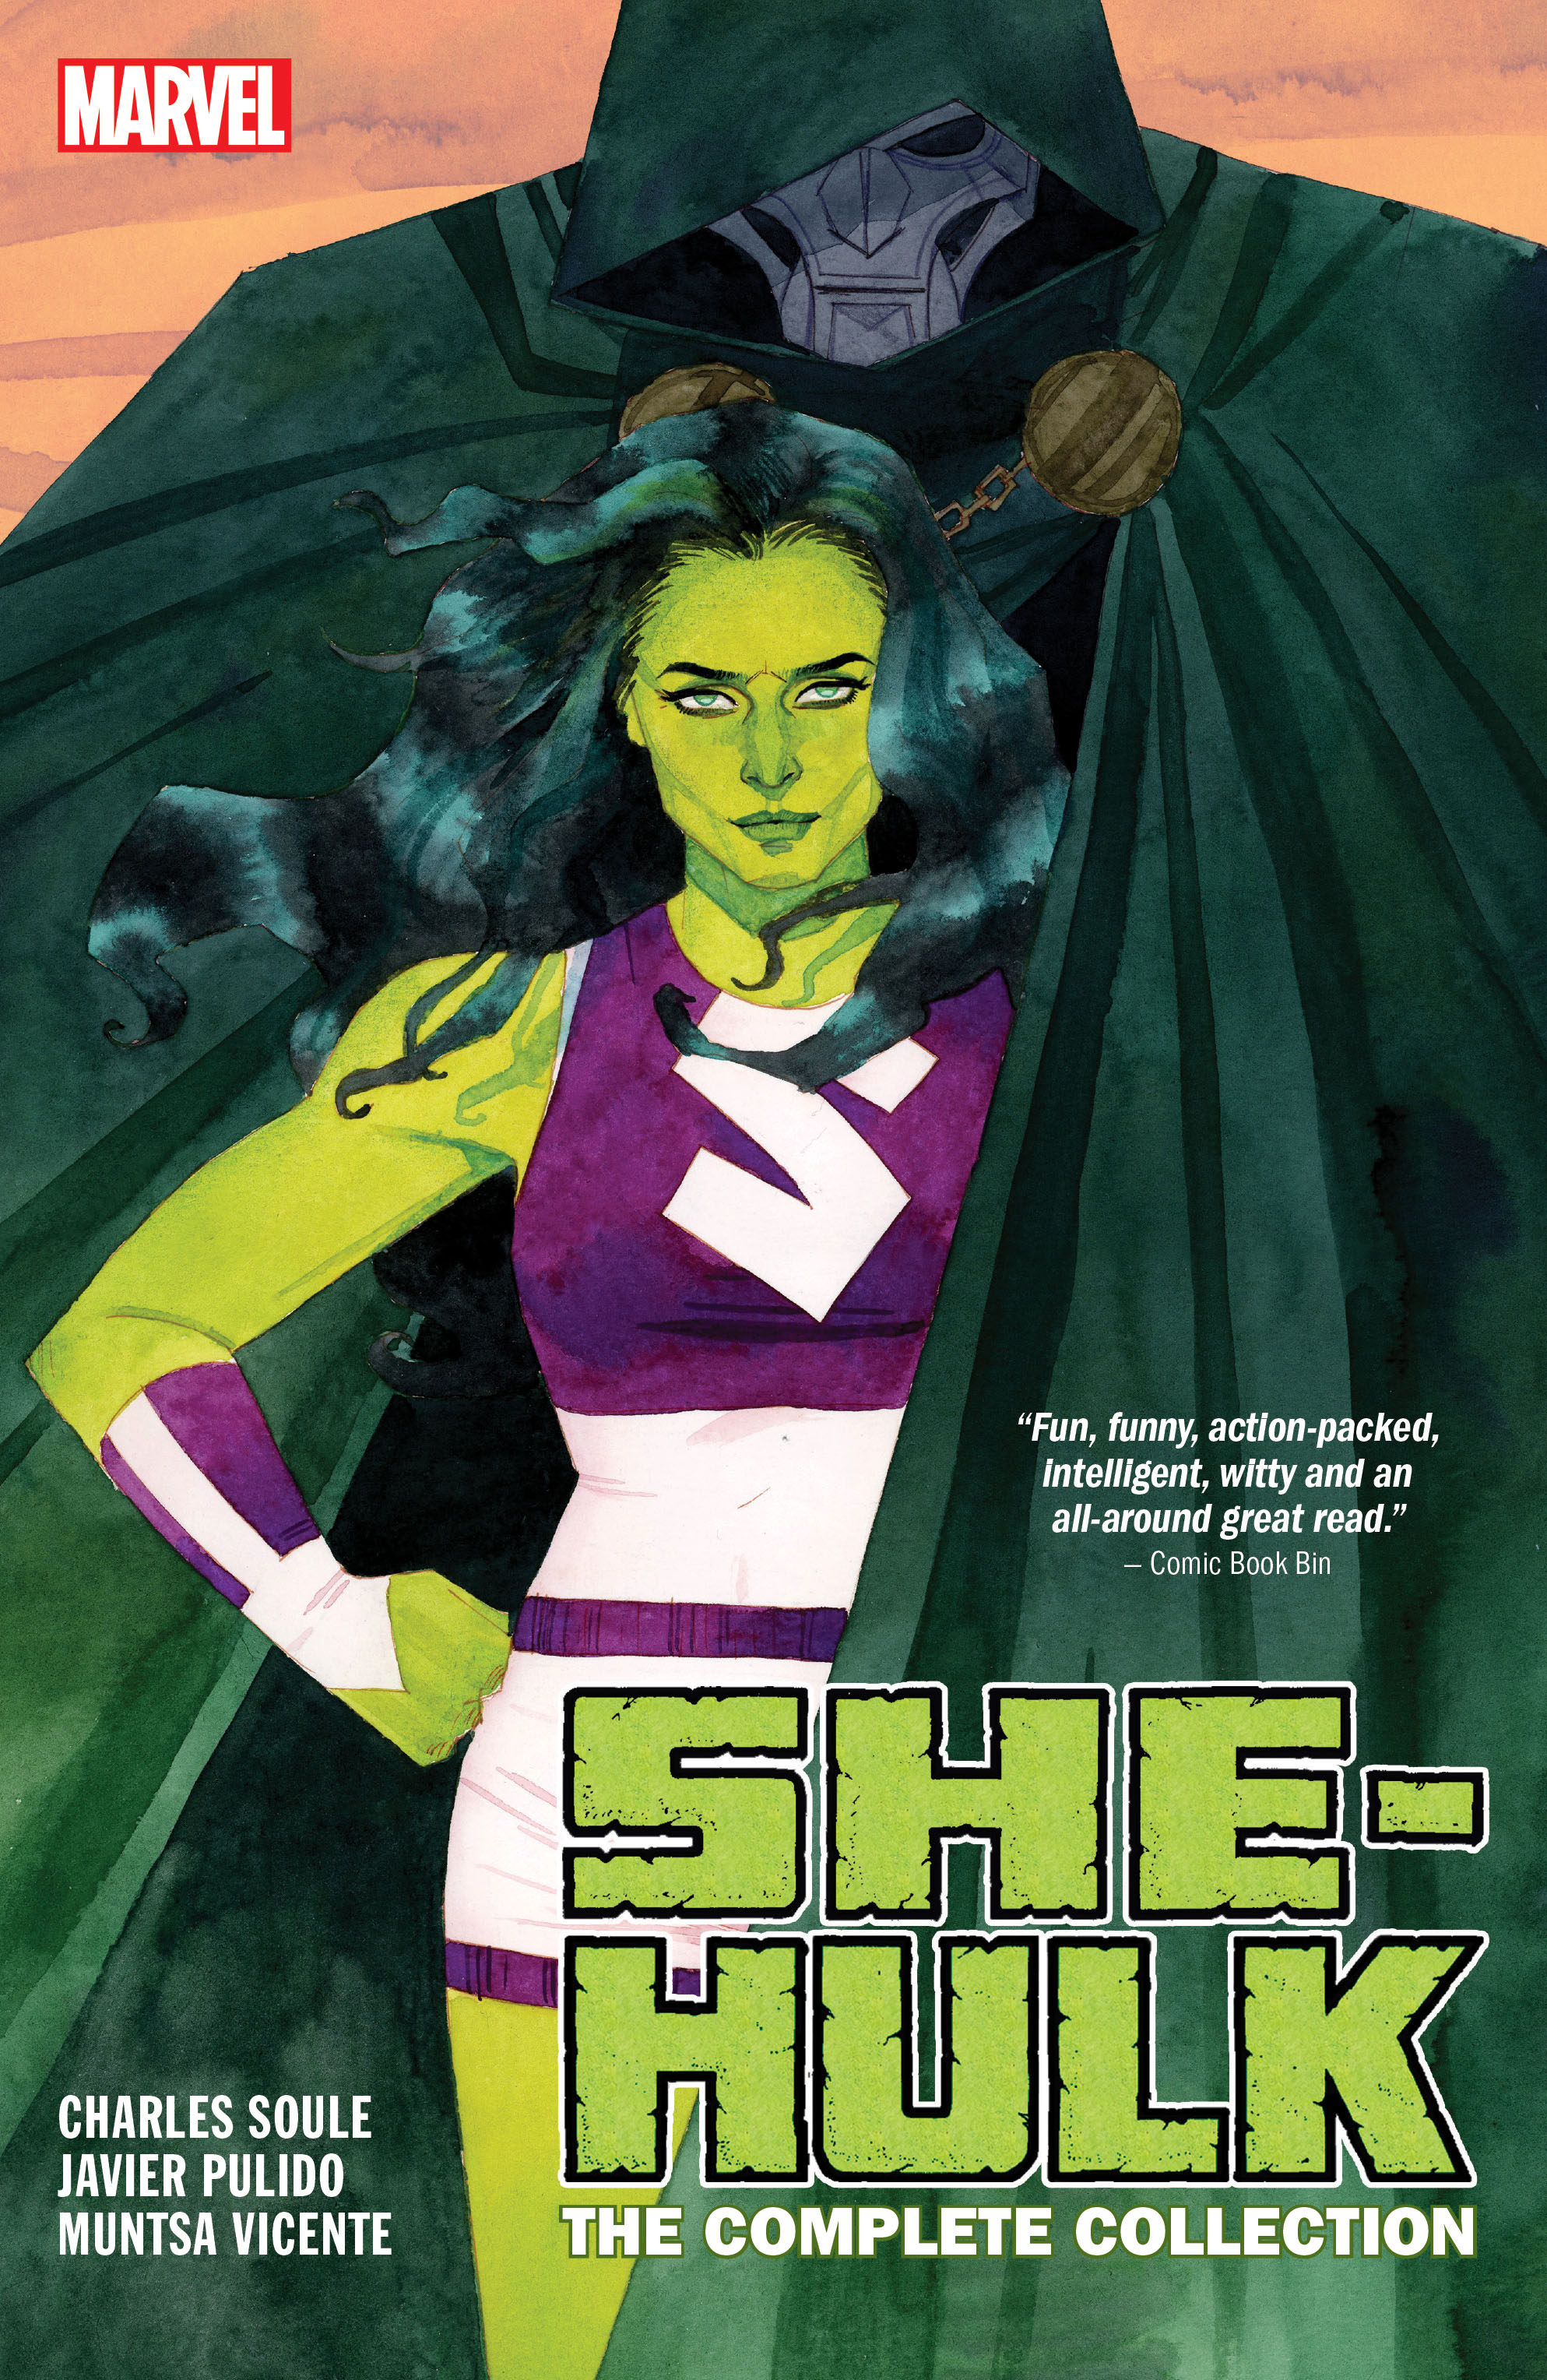 She-Hulk by Soule & Pulido: The Complete Collection (Trade Paperback)